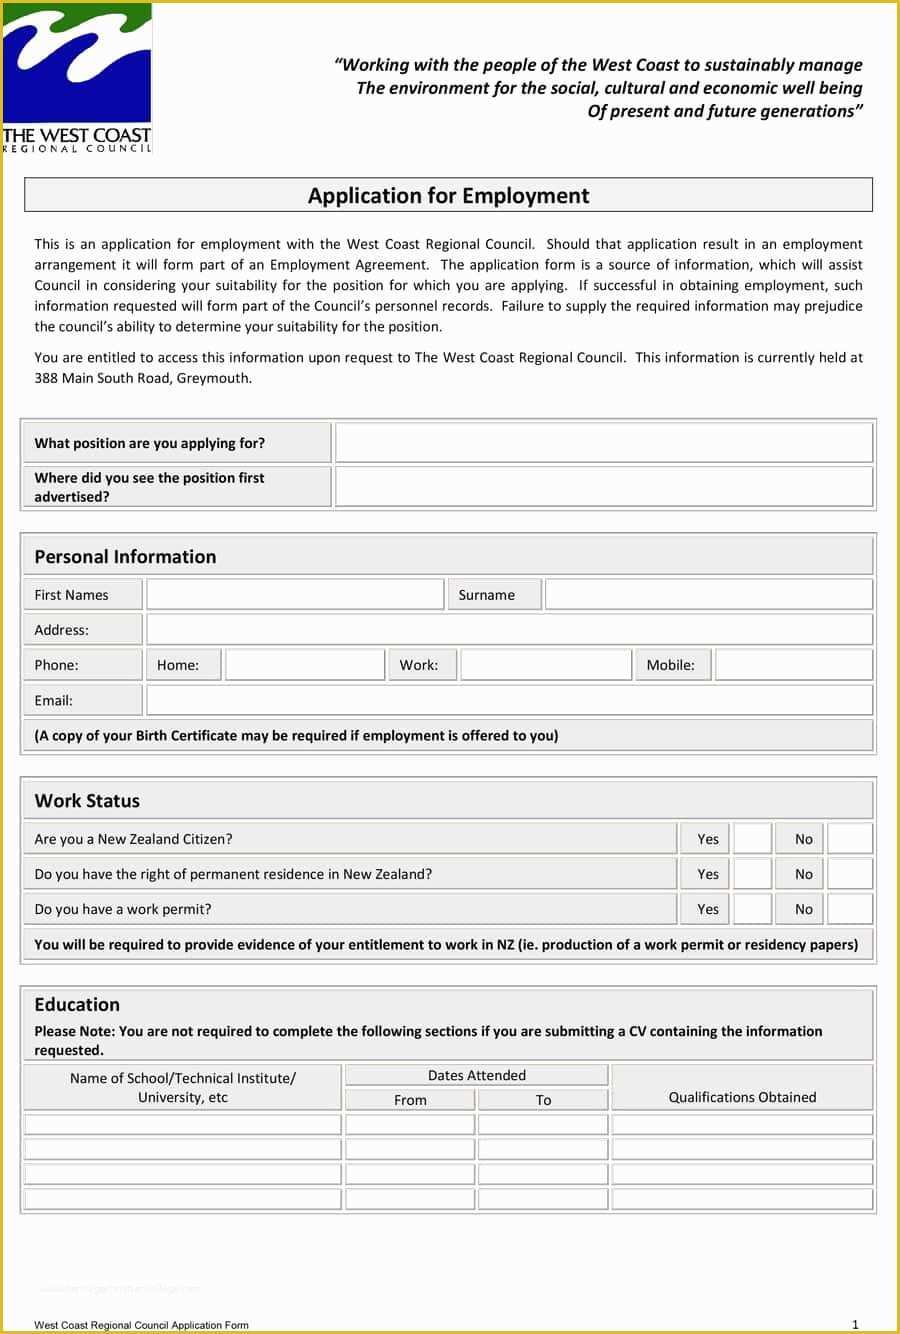 Free Application form Template Of 50 Free Employment Job Application form Templates